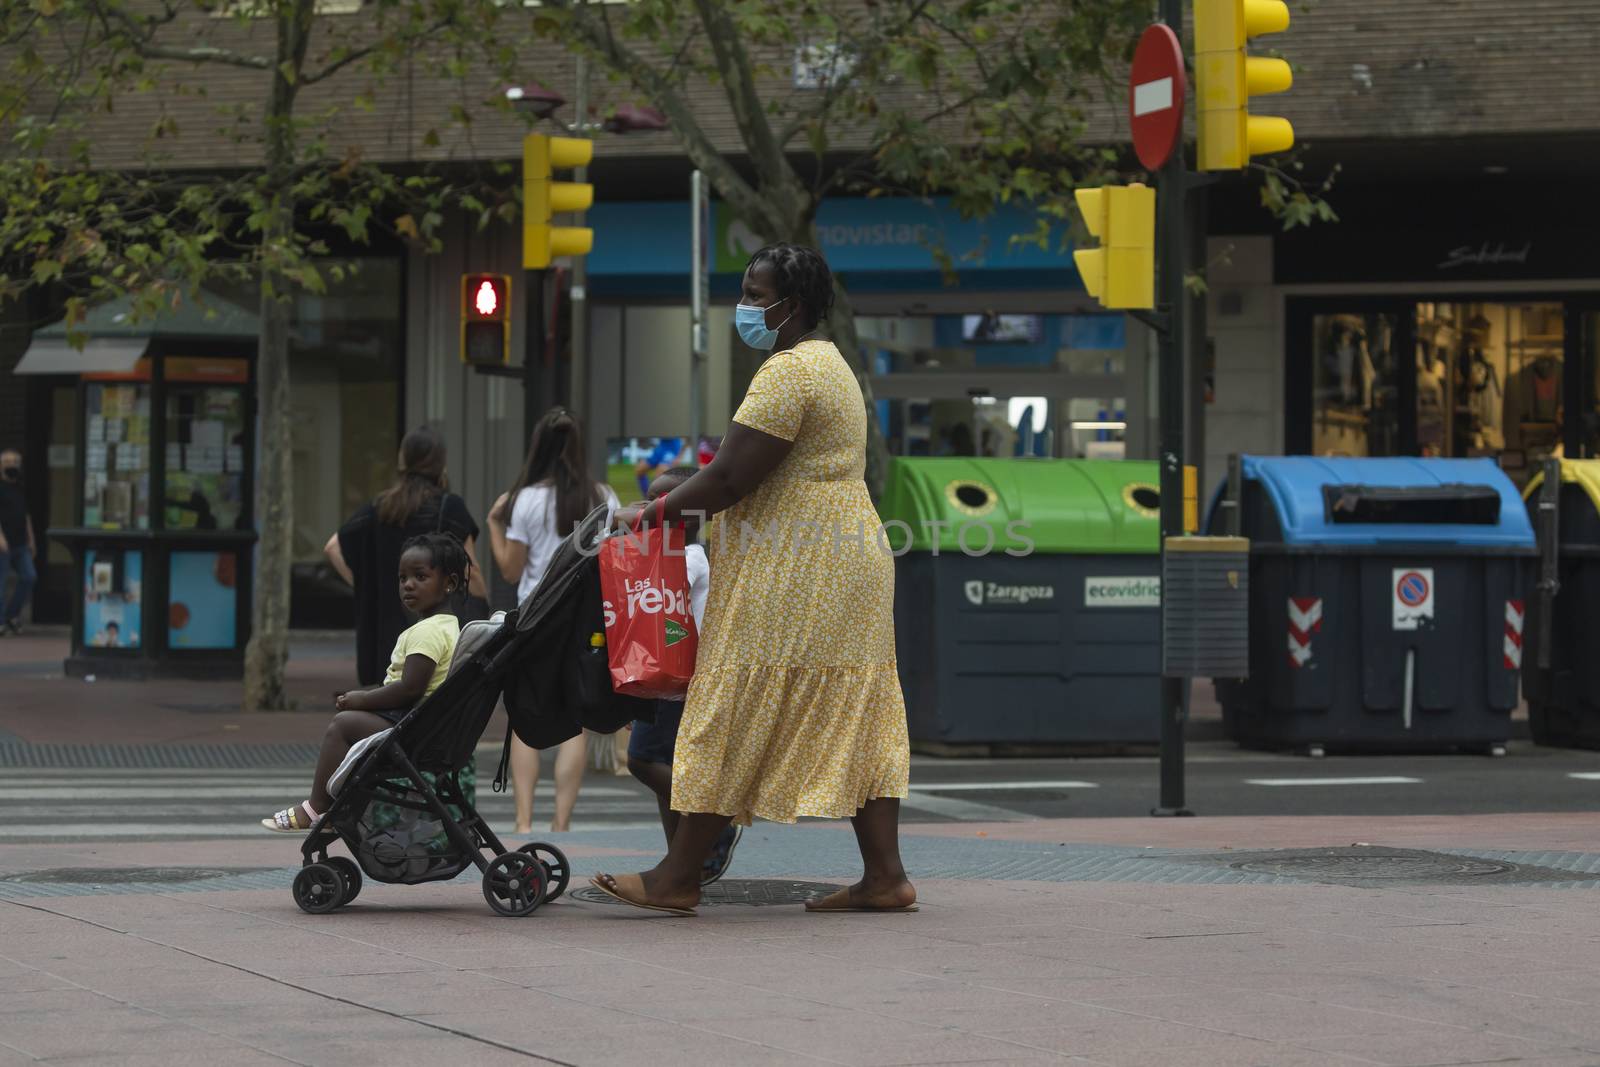 Zaragoza, Spain - August 18, 2020: A black inmigrant woman, with face masks, due to the coronavirus pandemic, pushes a stroller with her child in the central area of Zaragoza.